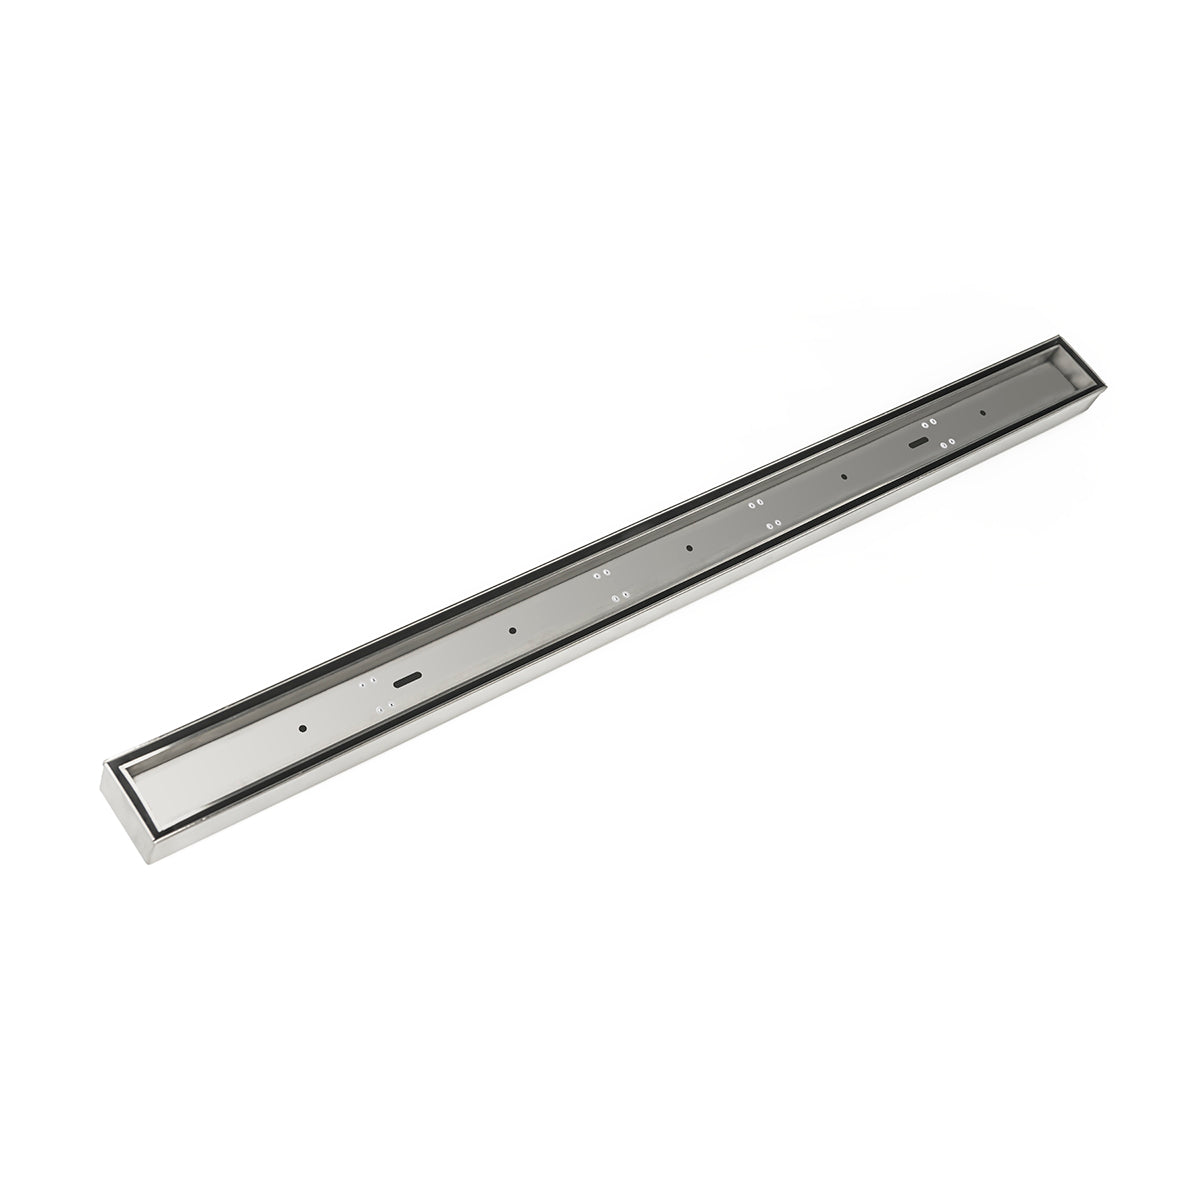 Infinity Drain 36" FX Low Profile Series Fixed Length Linear Drain Kit with Tile Insert Frame